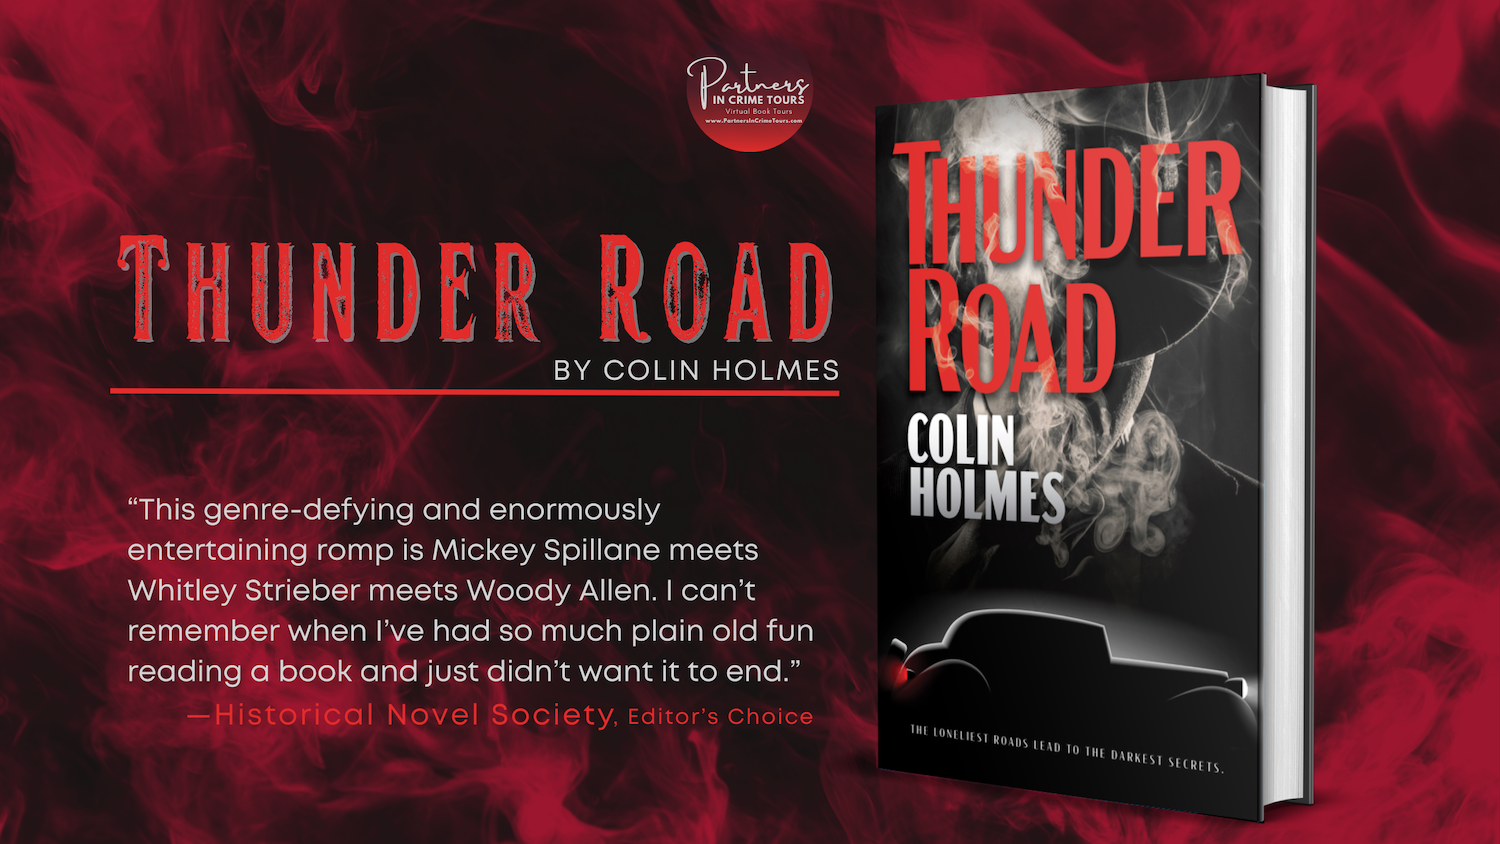 You are currently viewing Thunder Road: New Noir